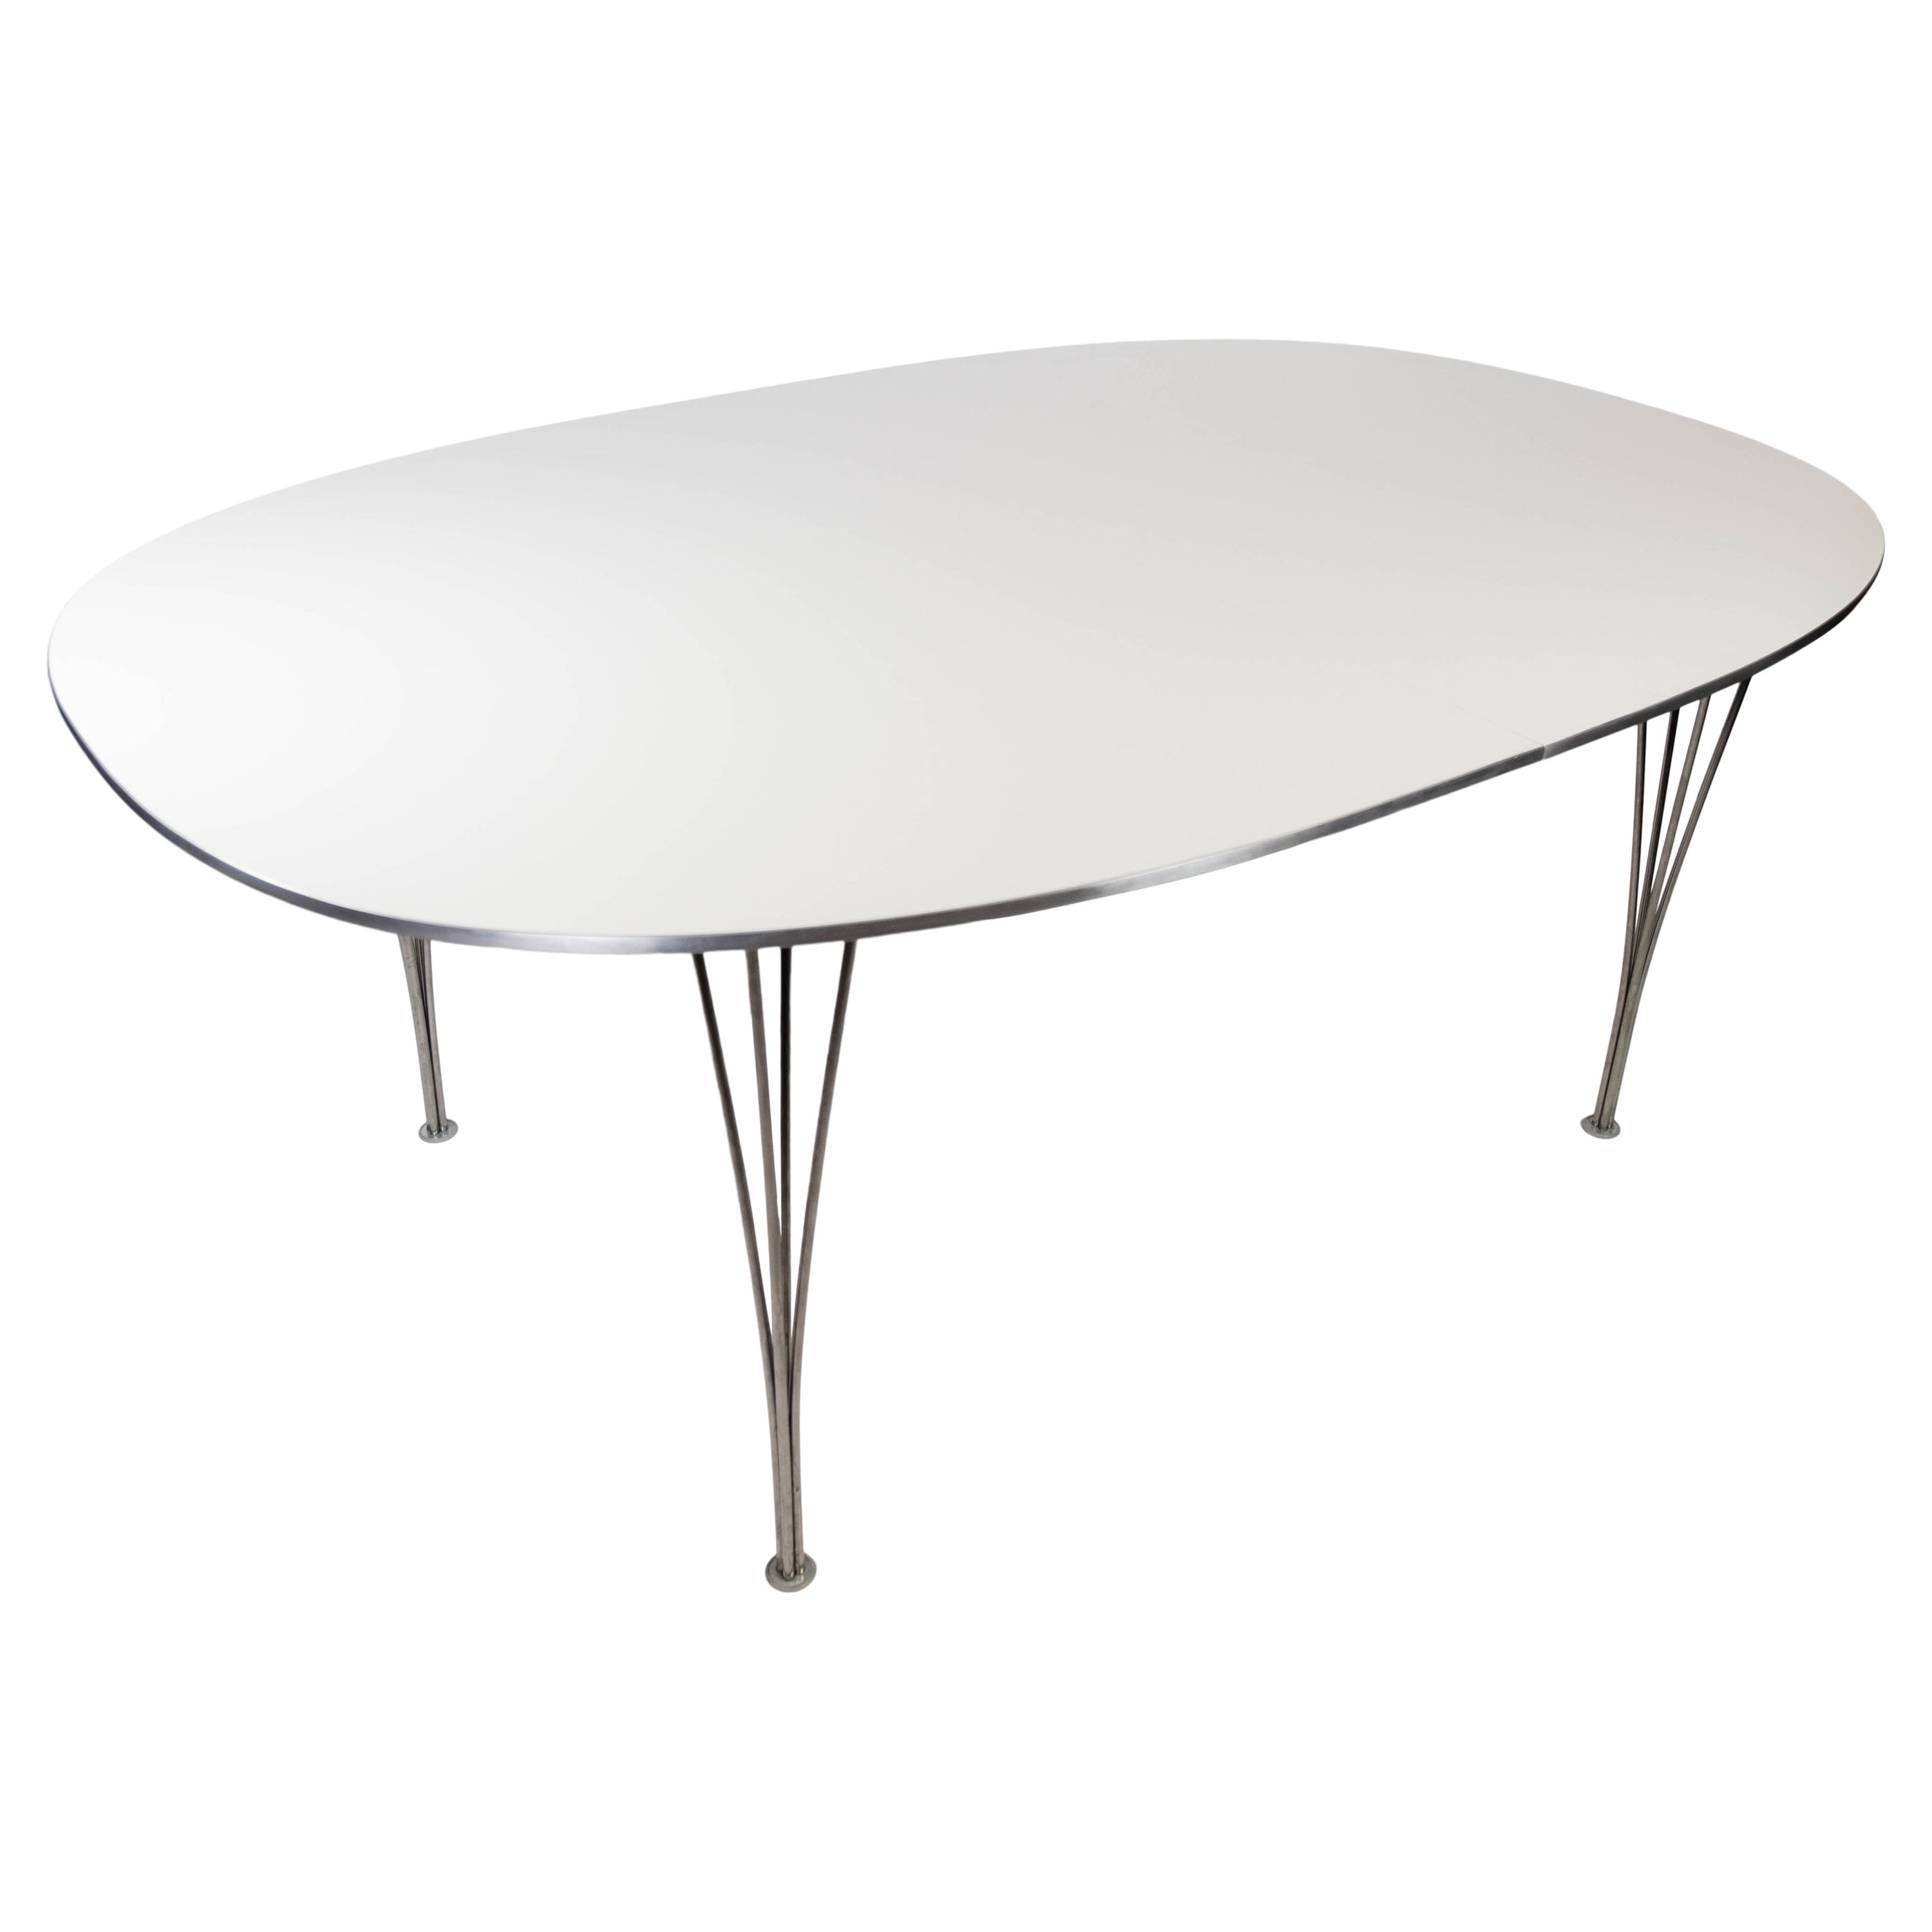 Skifte tøj Symposium Trivial Super Ellipse Dining Table with White Laminate Designed by Piet Hein, 1998  For Sale at 1stDibs | super ellipse table